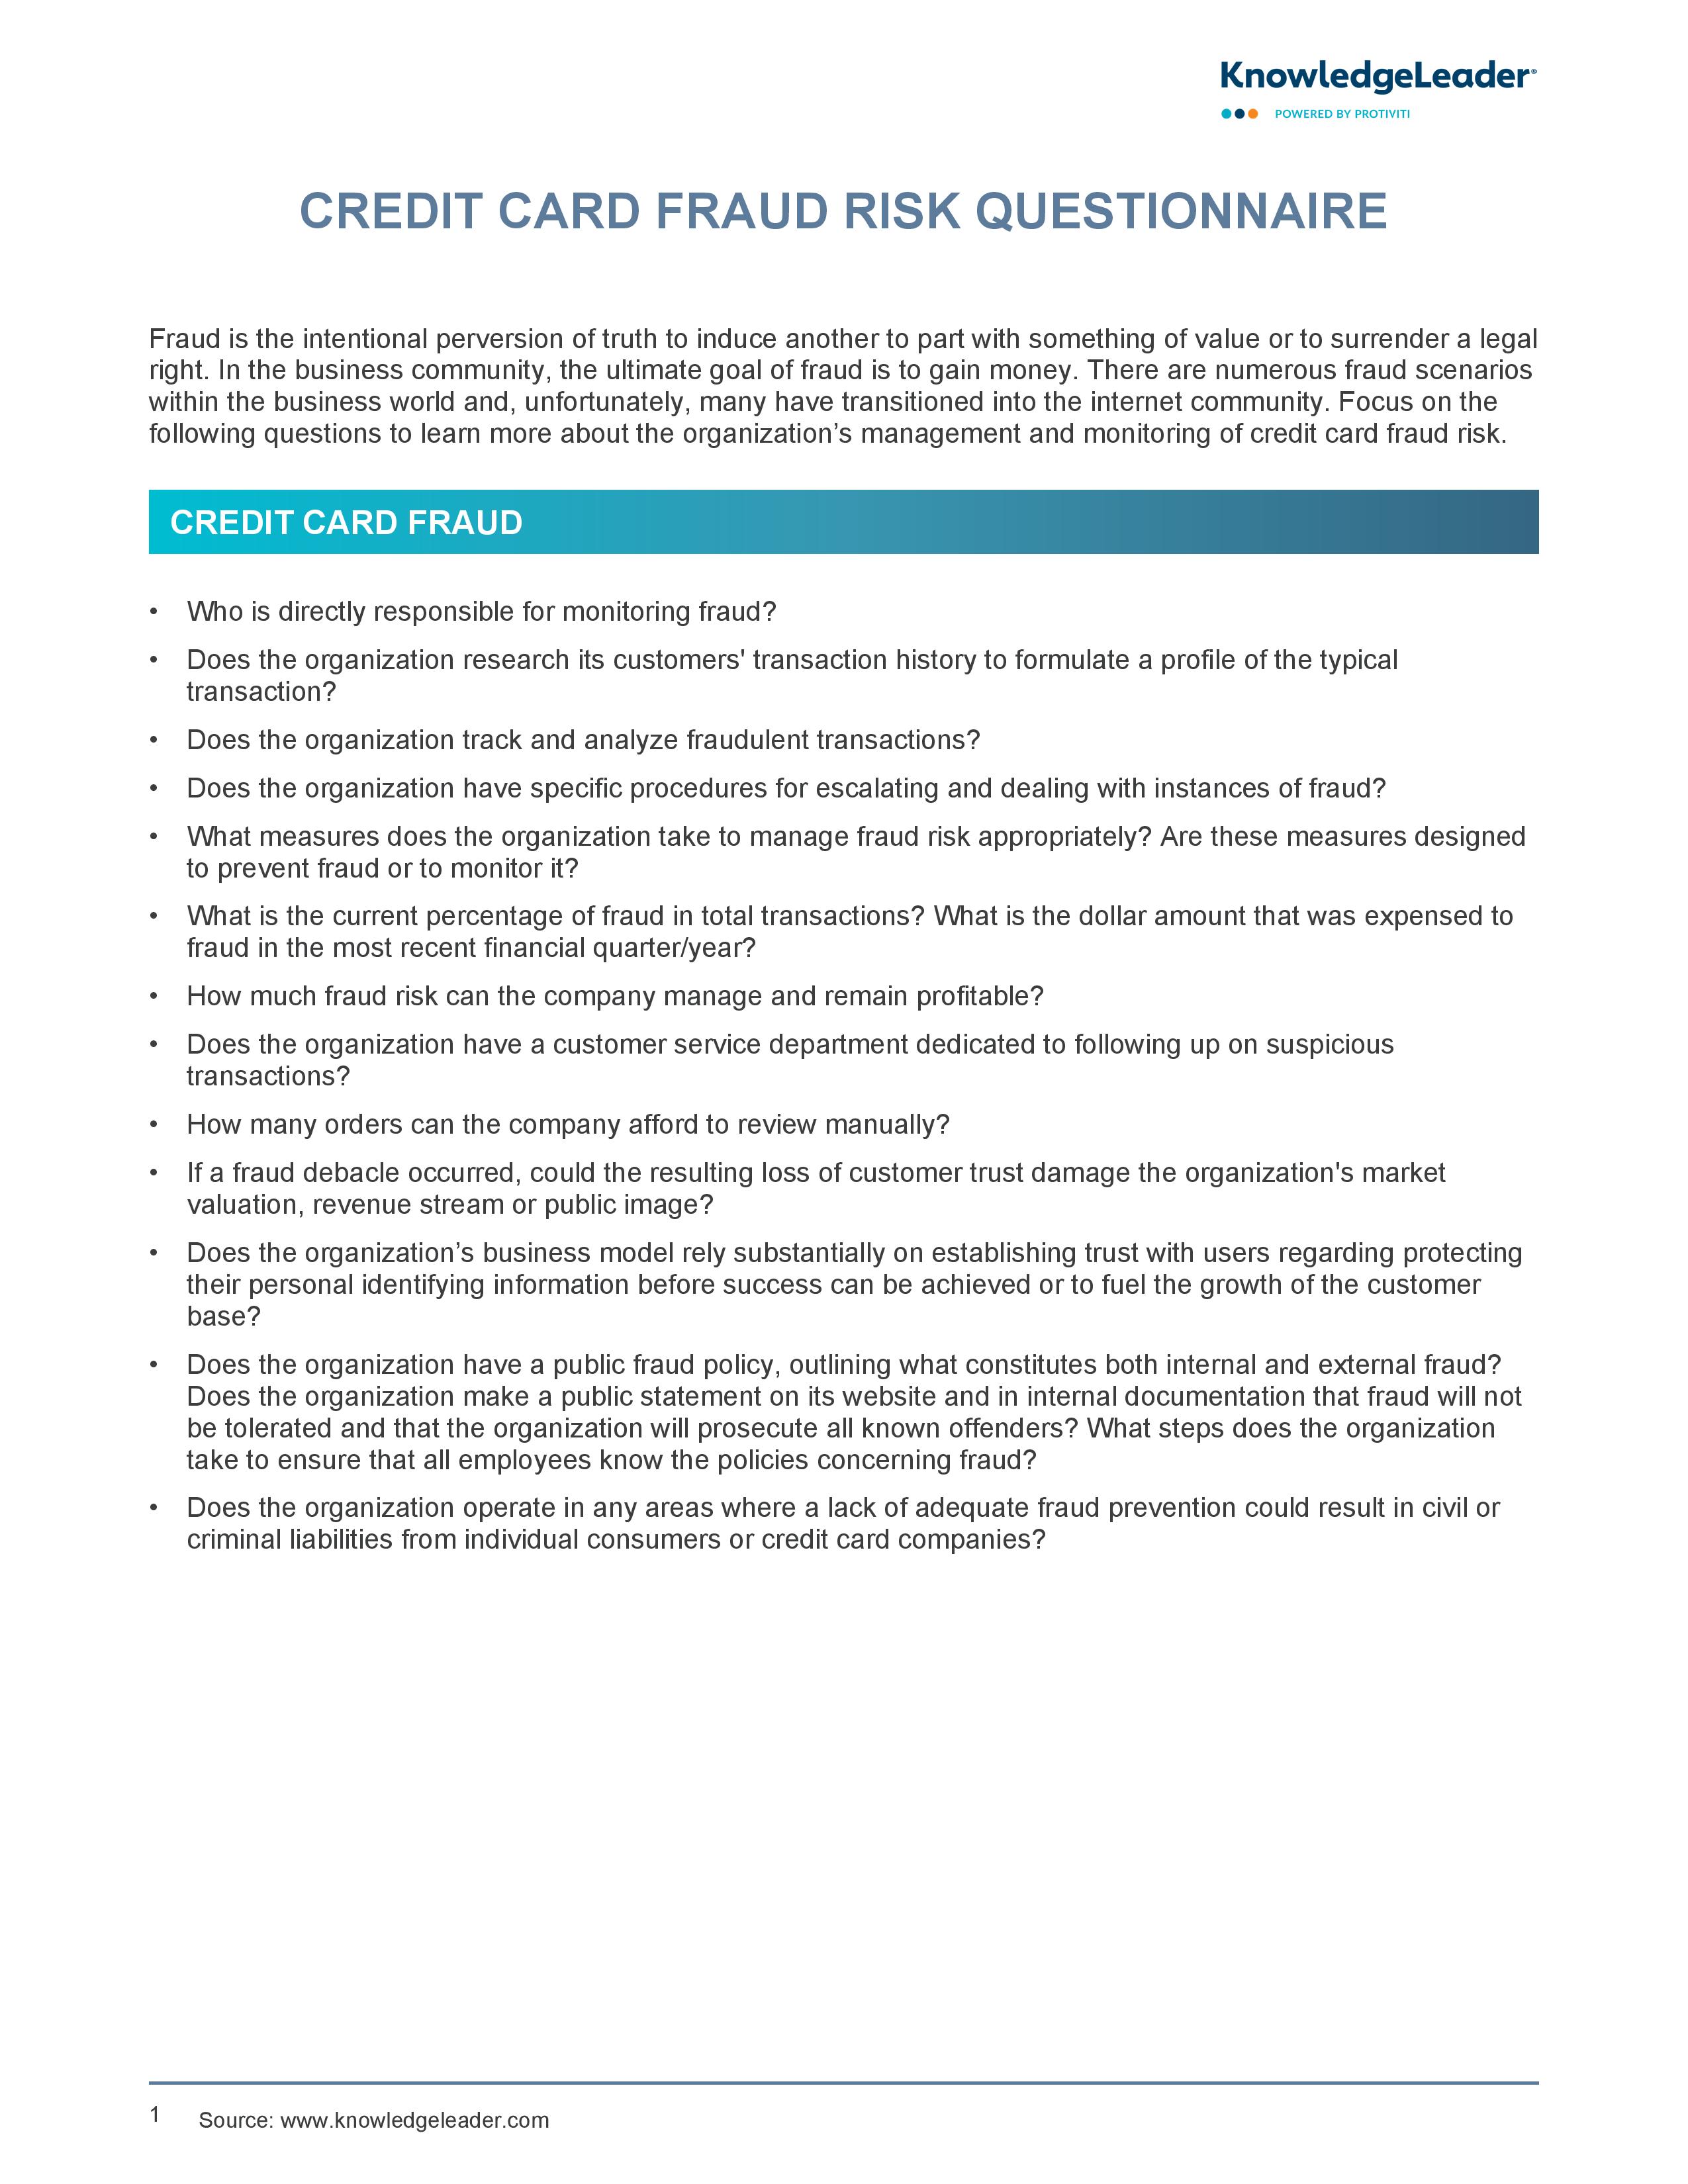 screenshot of the first page of Credit Card Fraud Risk Questionnaire